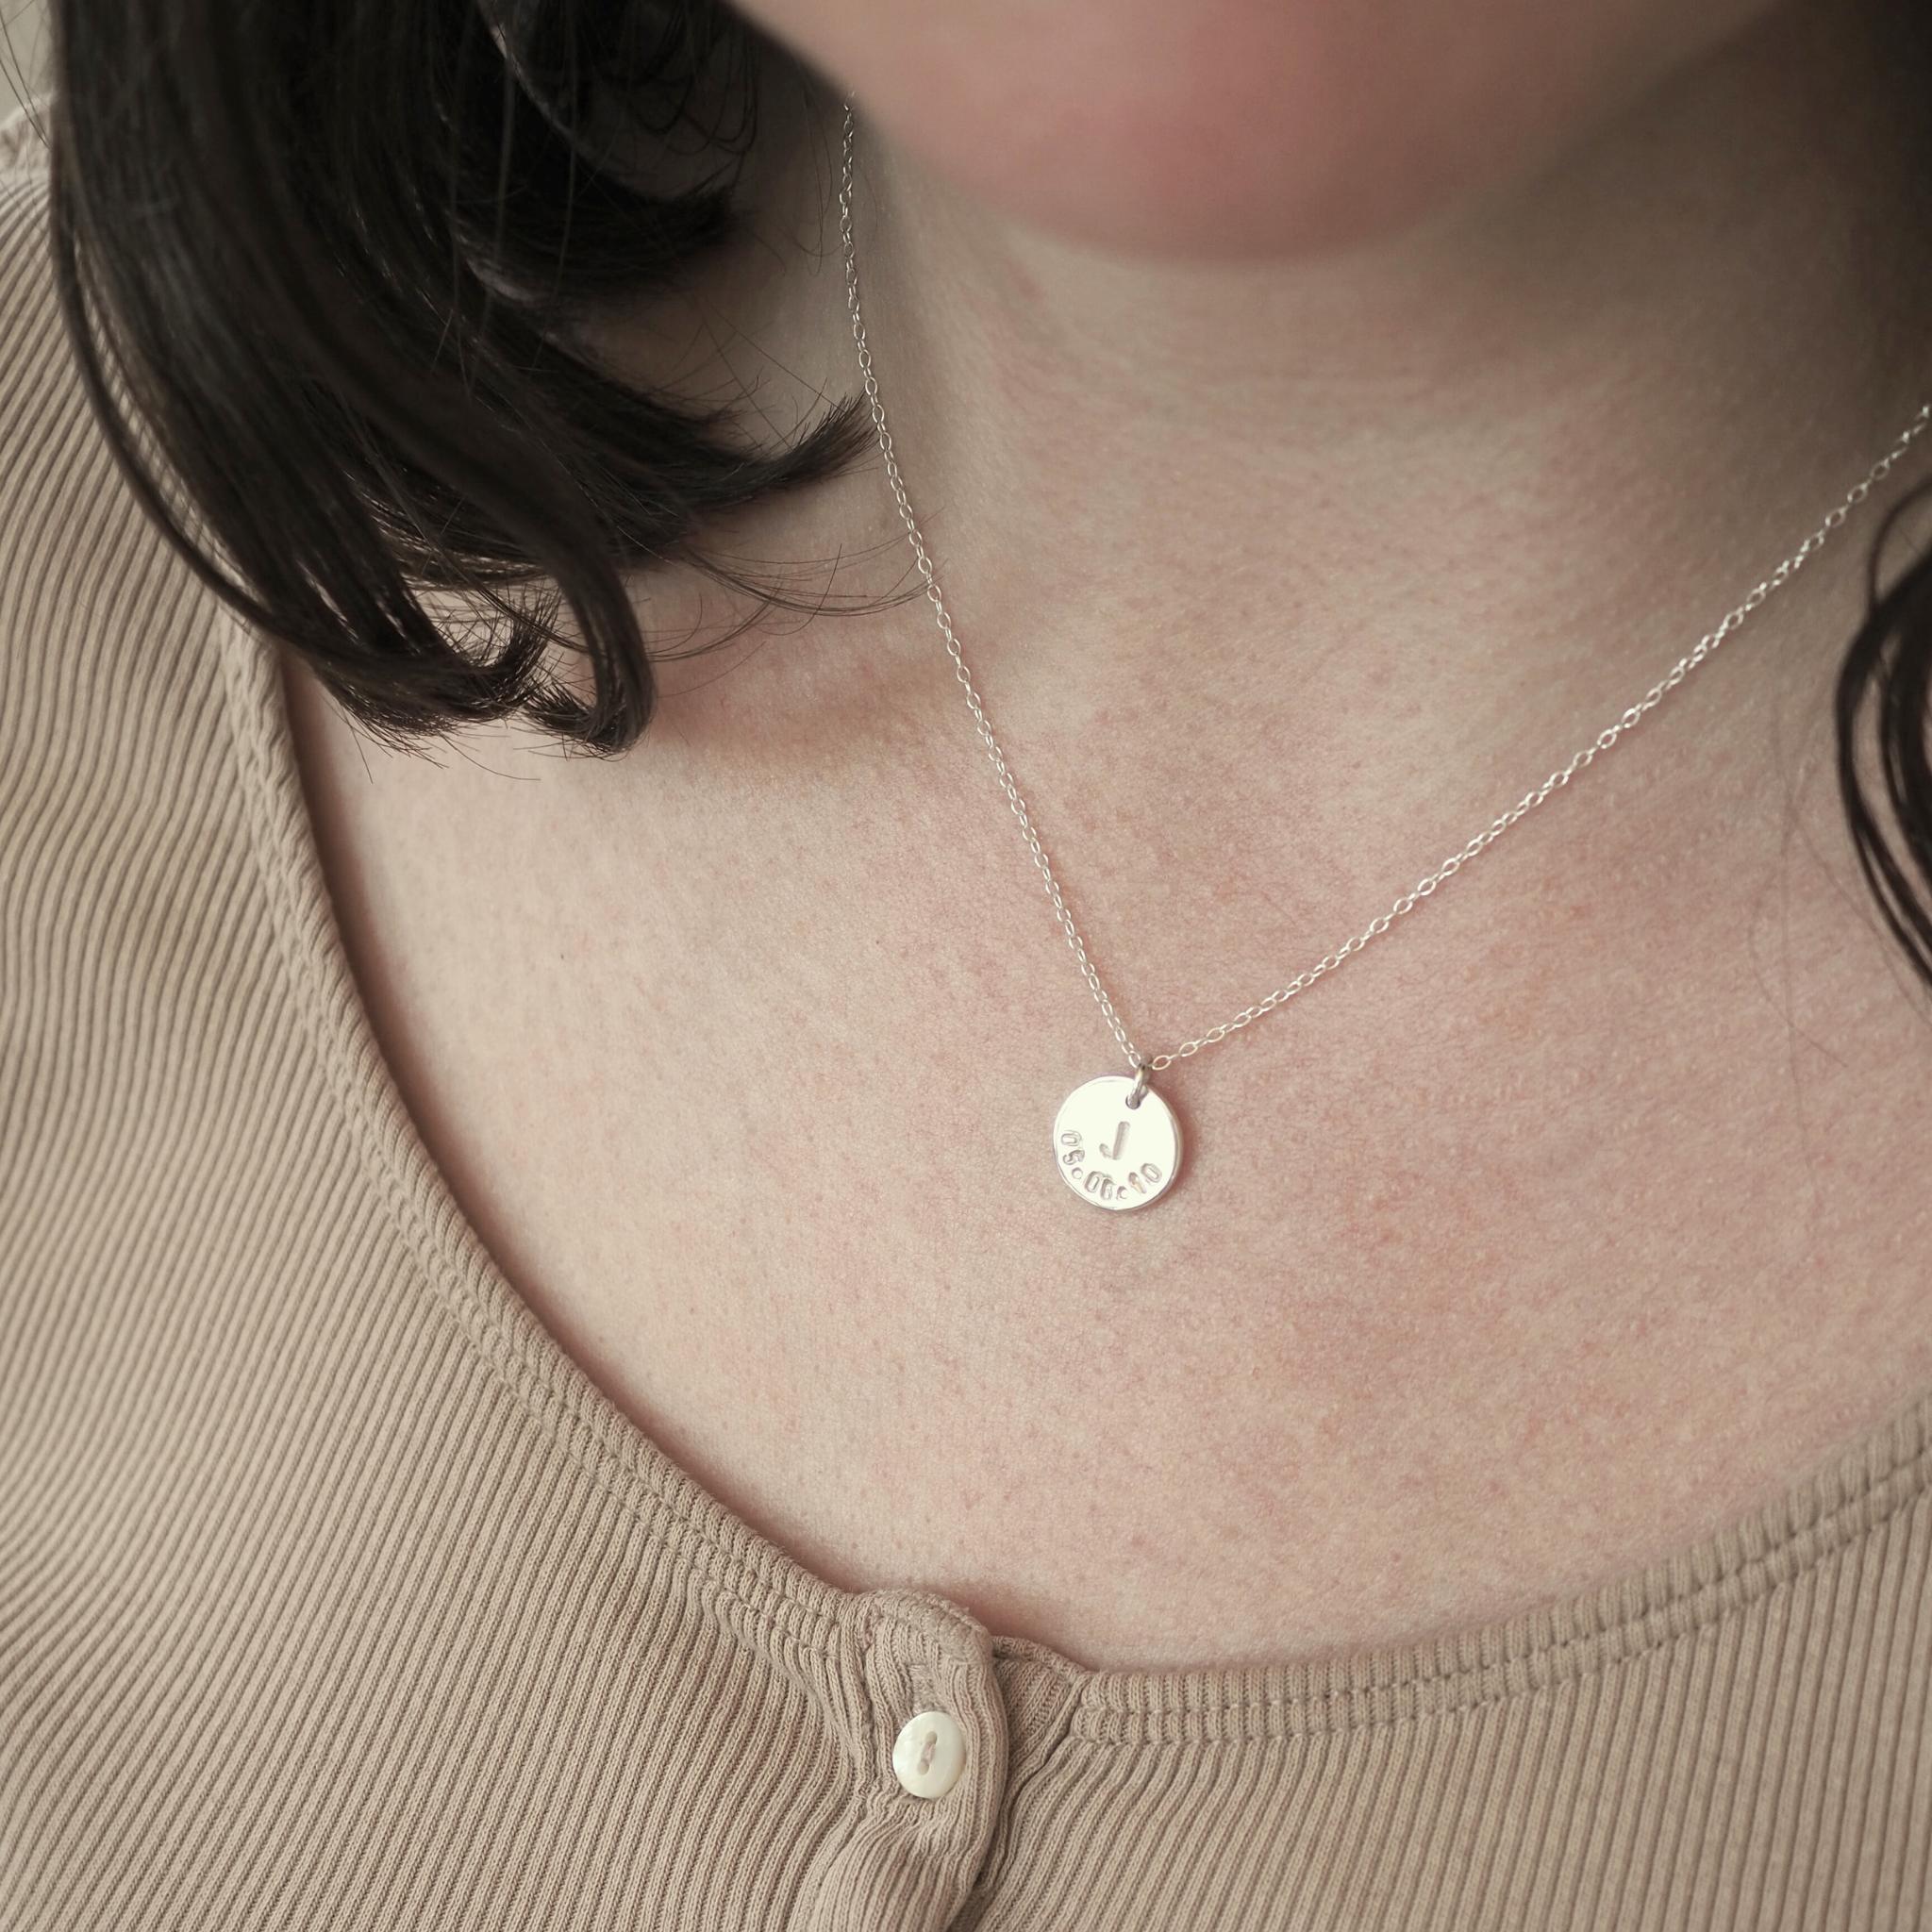 Initial/word/date necklace – Mer•made jewelry by Keri Mosier